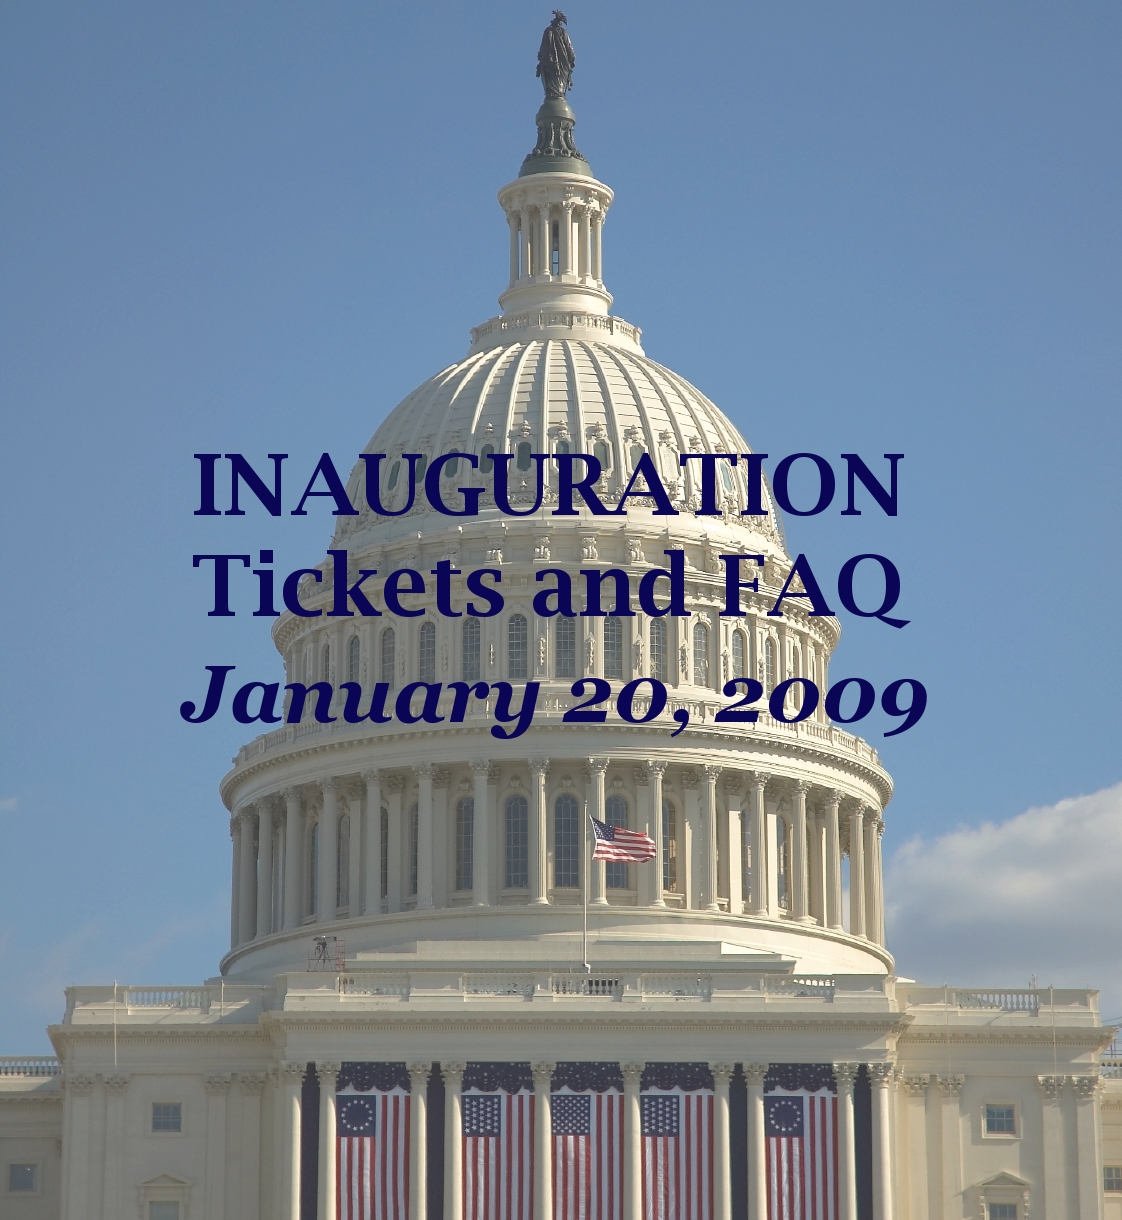 Information on the 2009 Presidential Inauguration